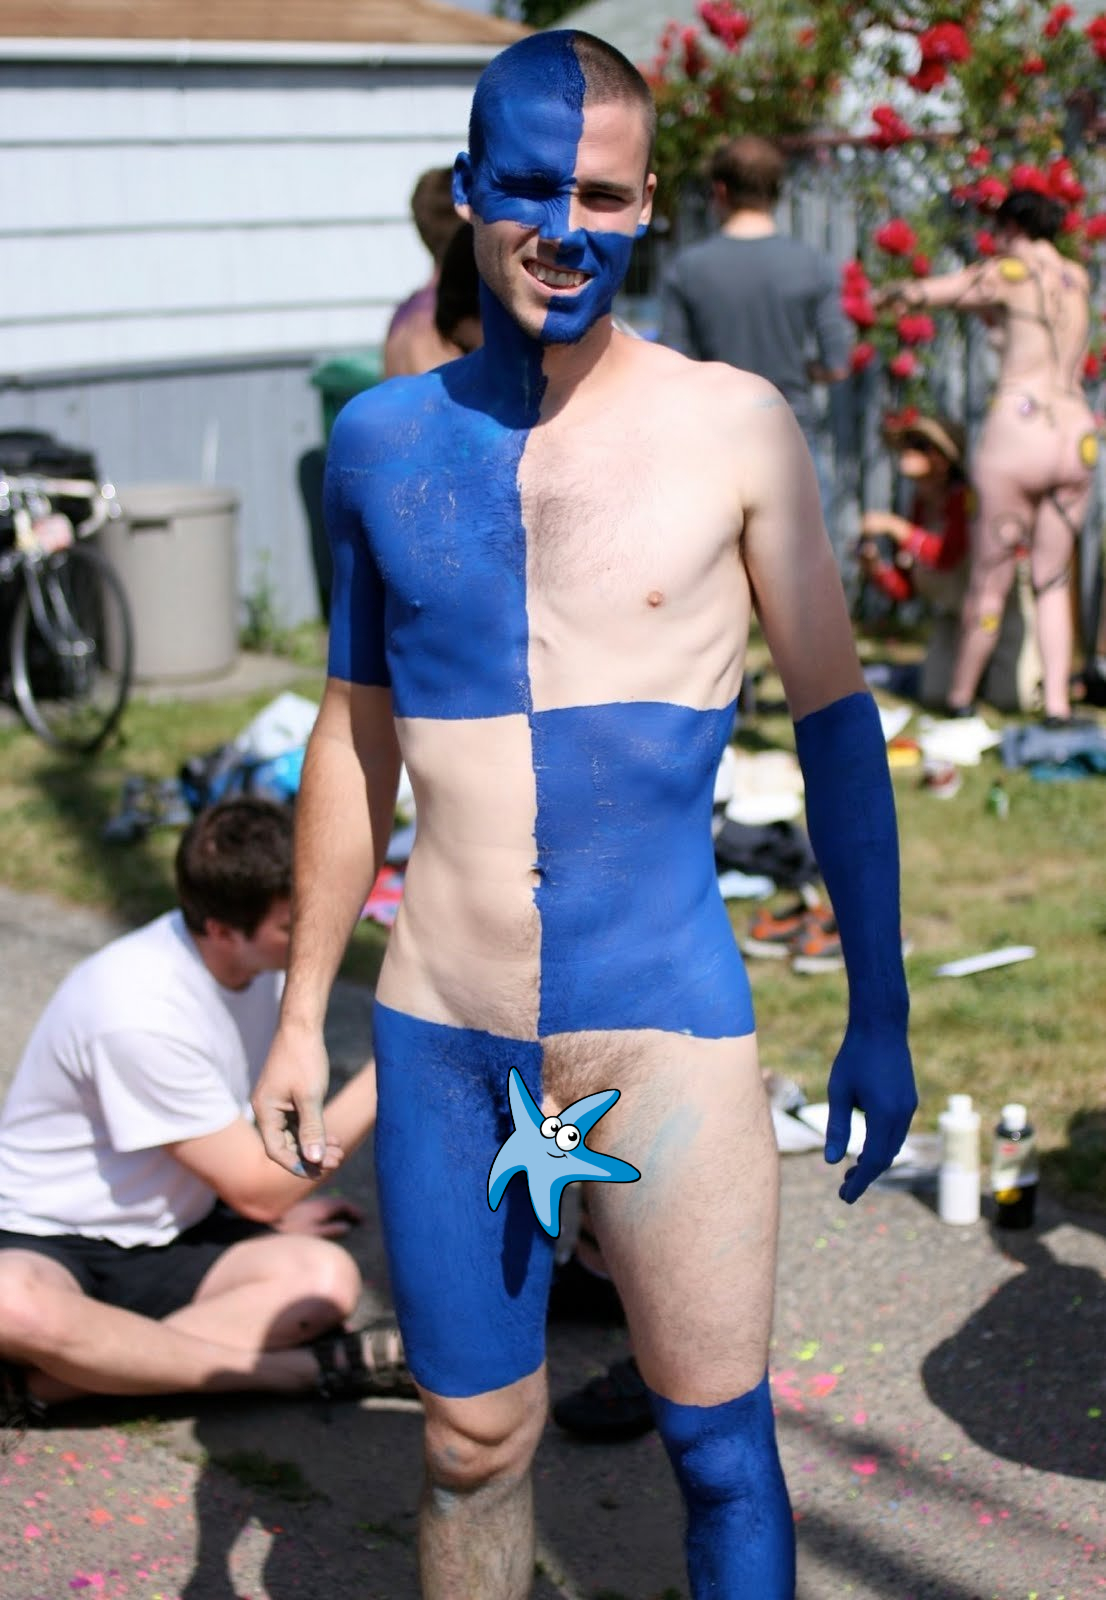 Nude guy with body paint